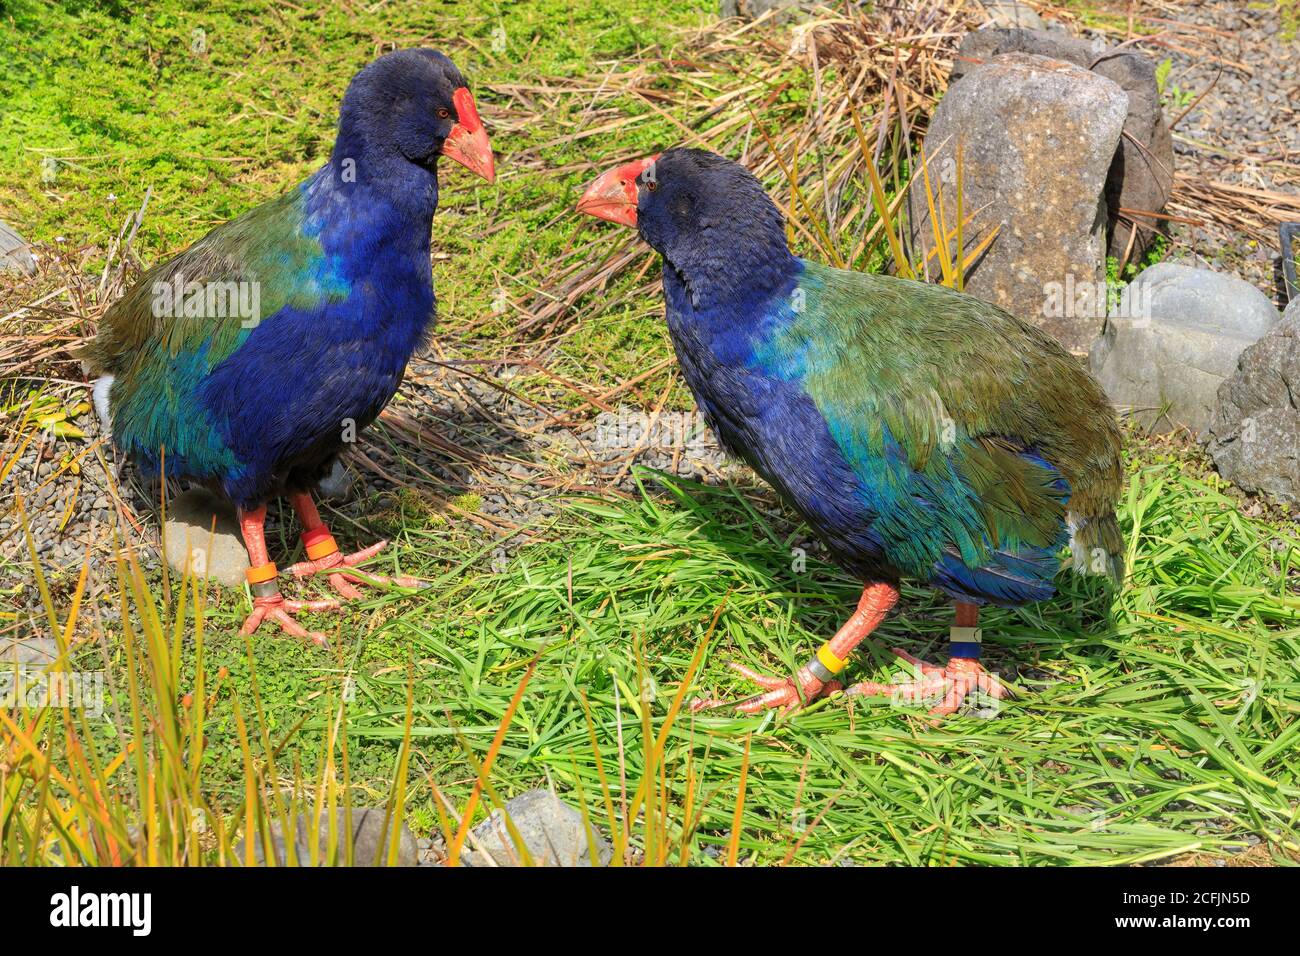 A pair of takahe, endangered flightless birds with striking blue and green plumage found only in New Zealand Stock Photo